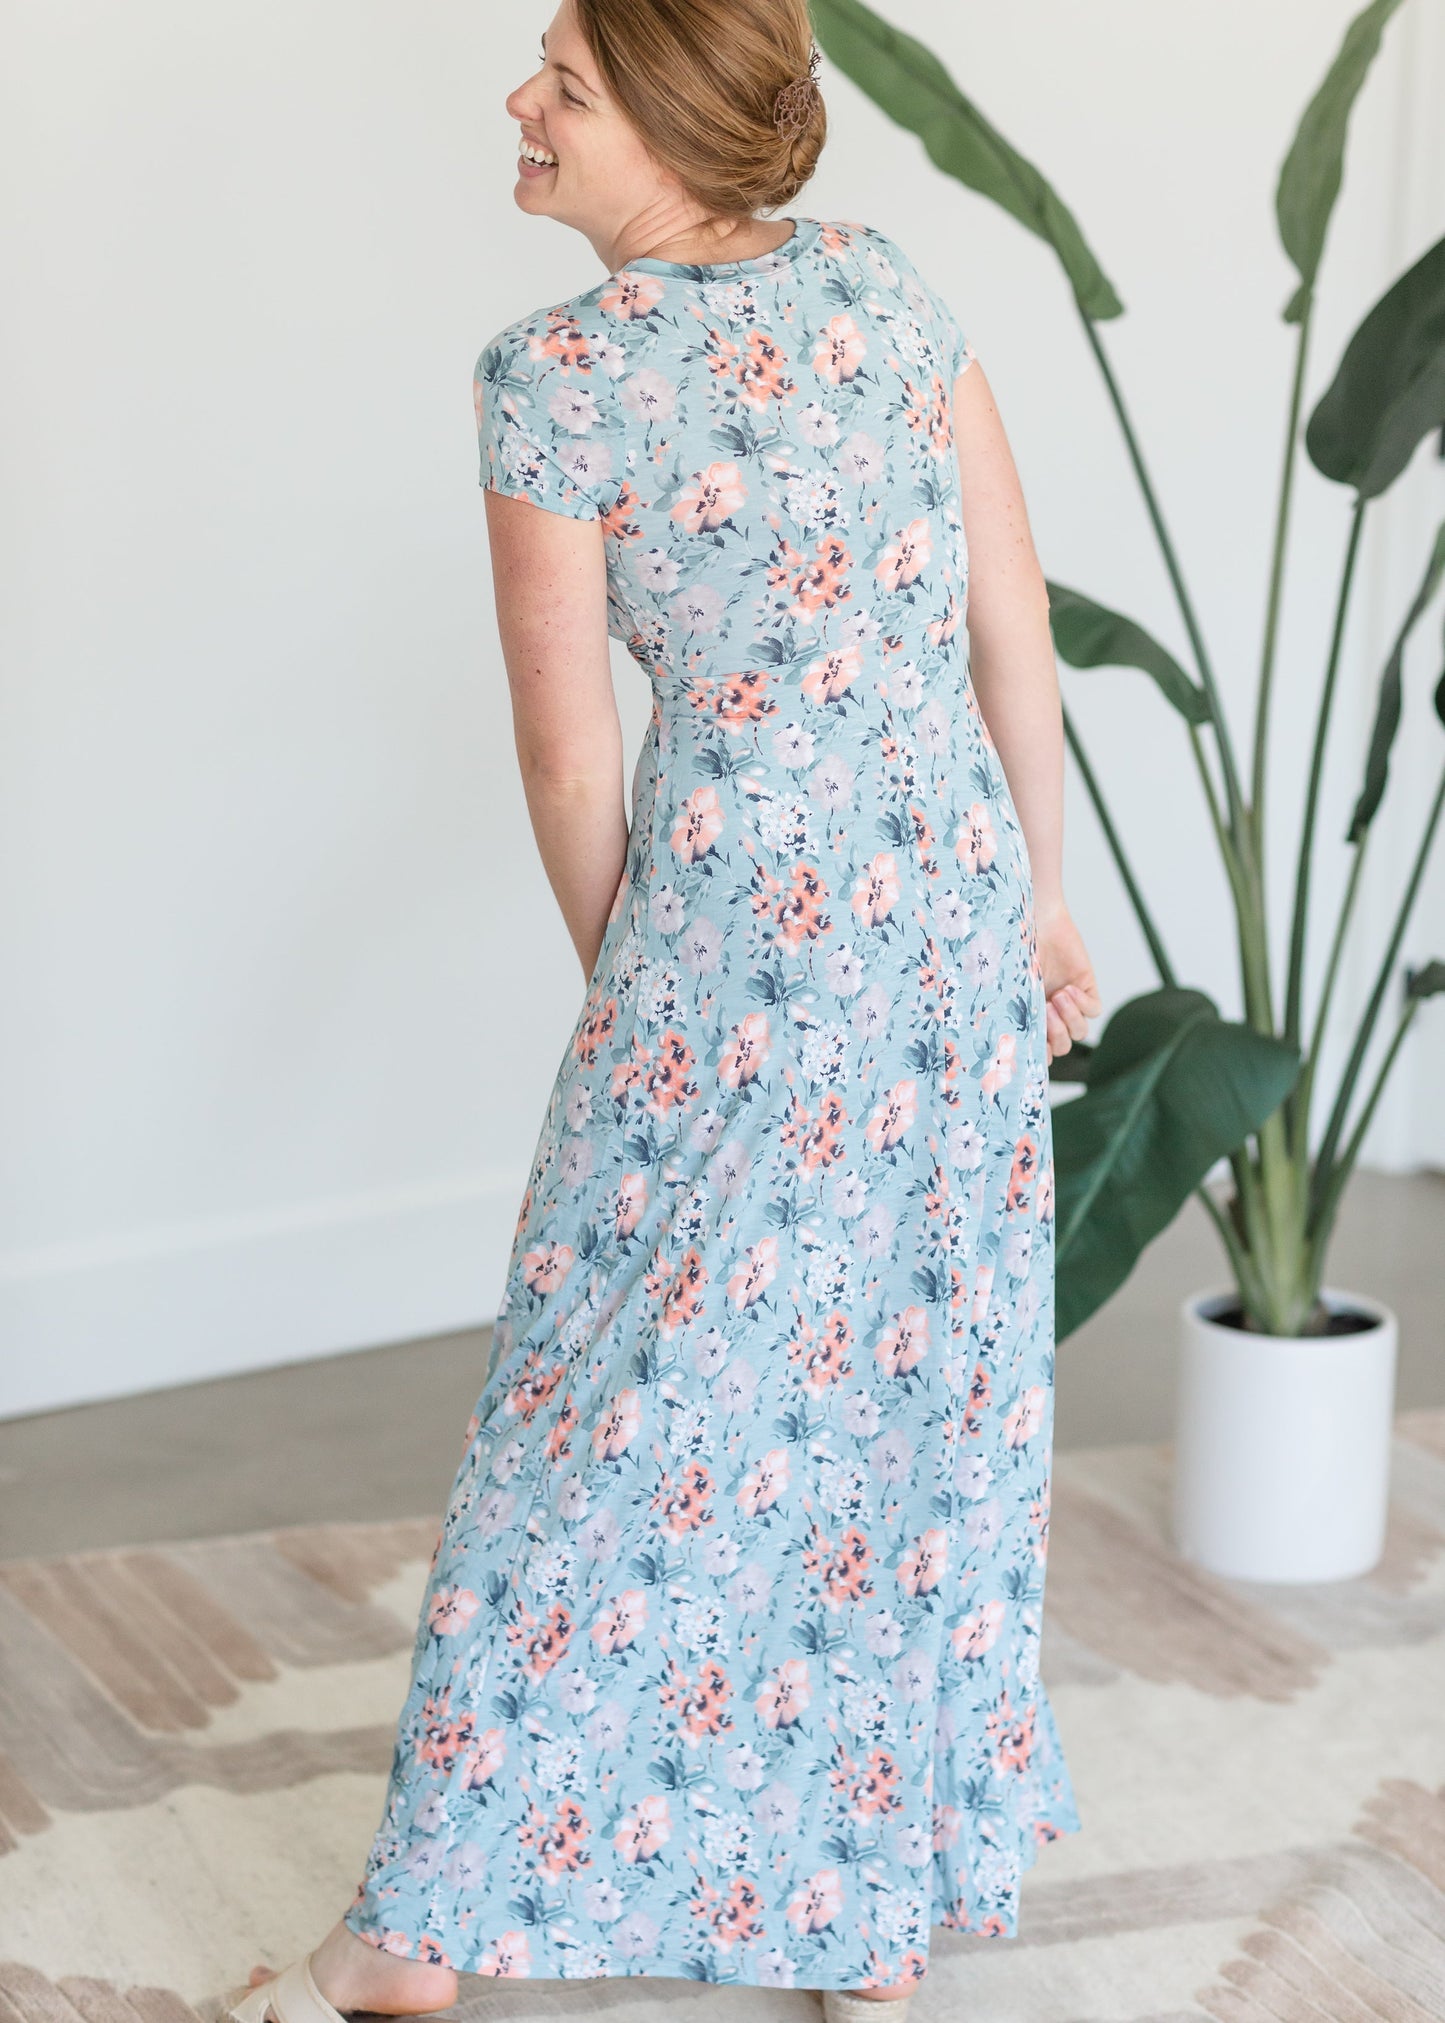 Crossover Floral Maxi Dress Dresses Beeson River